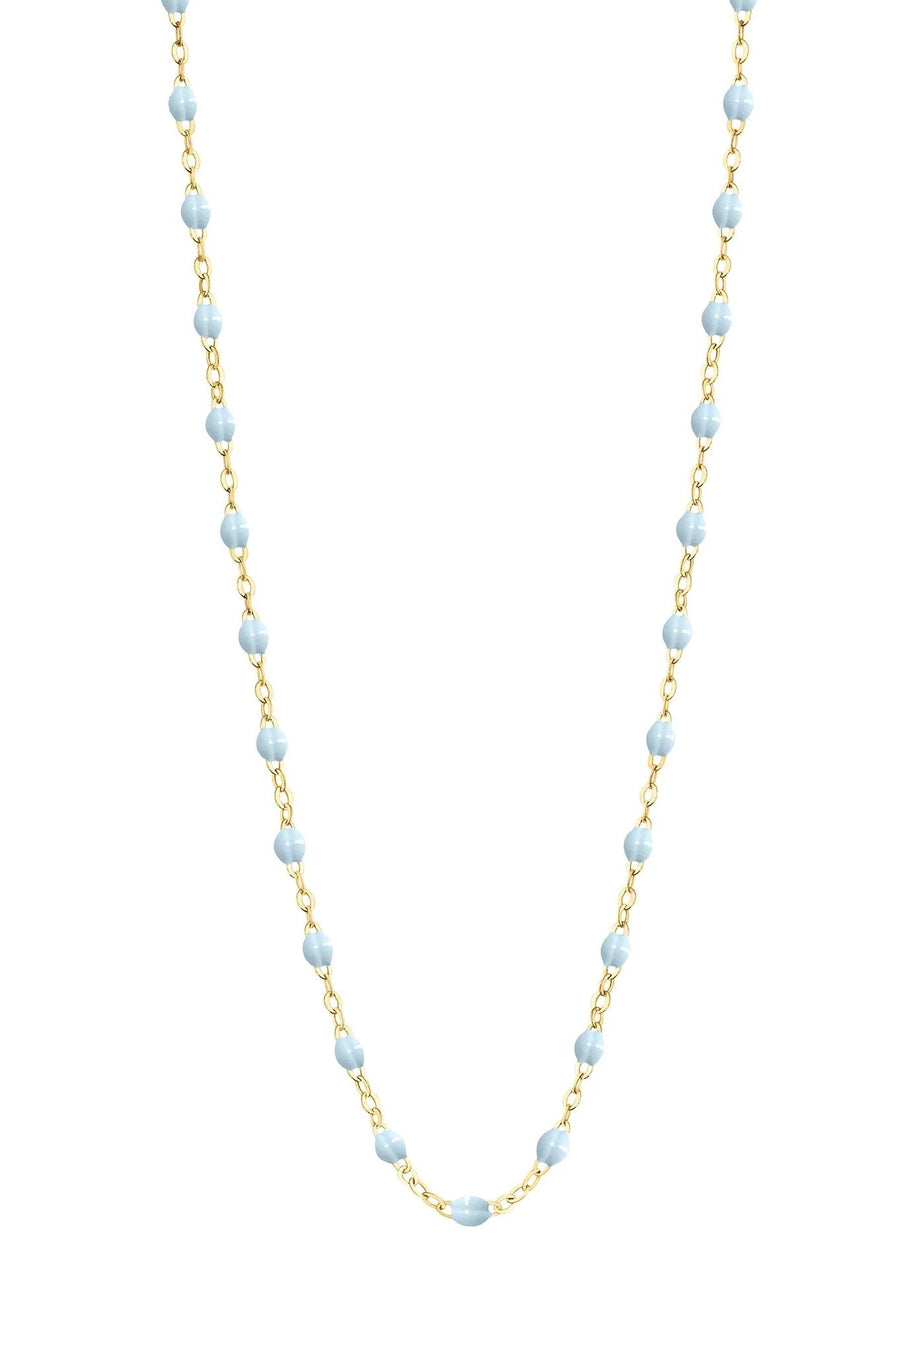 17.7" Classic Gigi Necklace - BABY BLUE + YELLOW GOLD